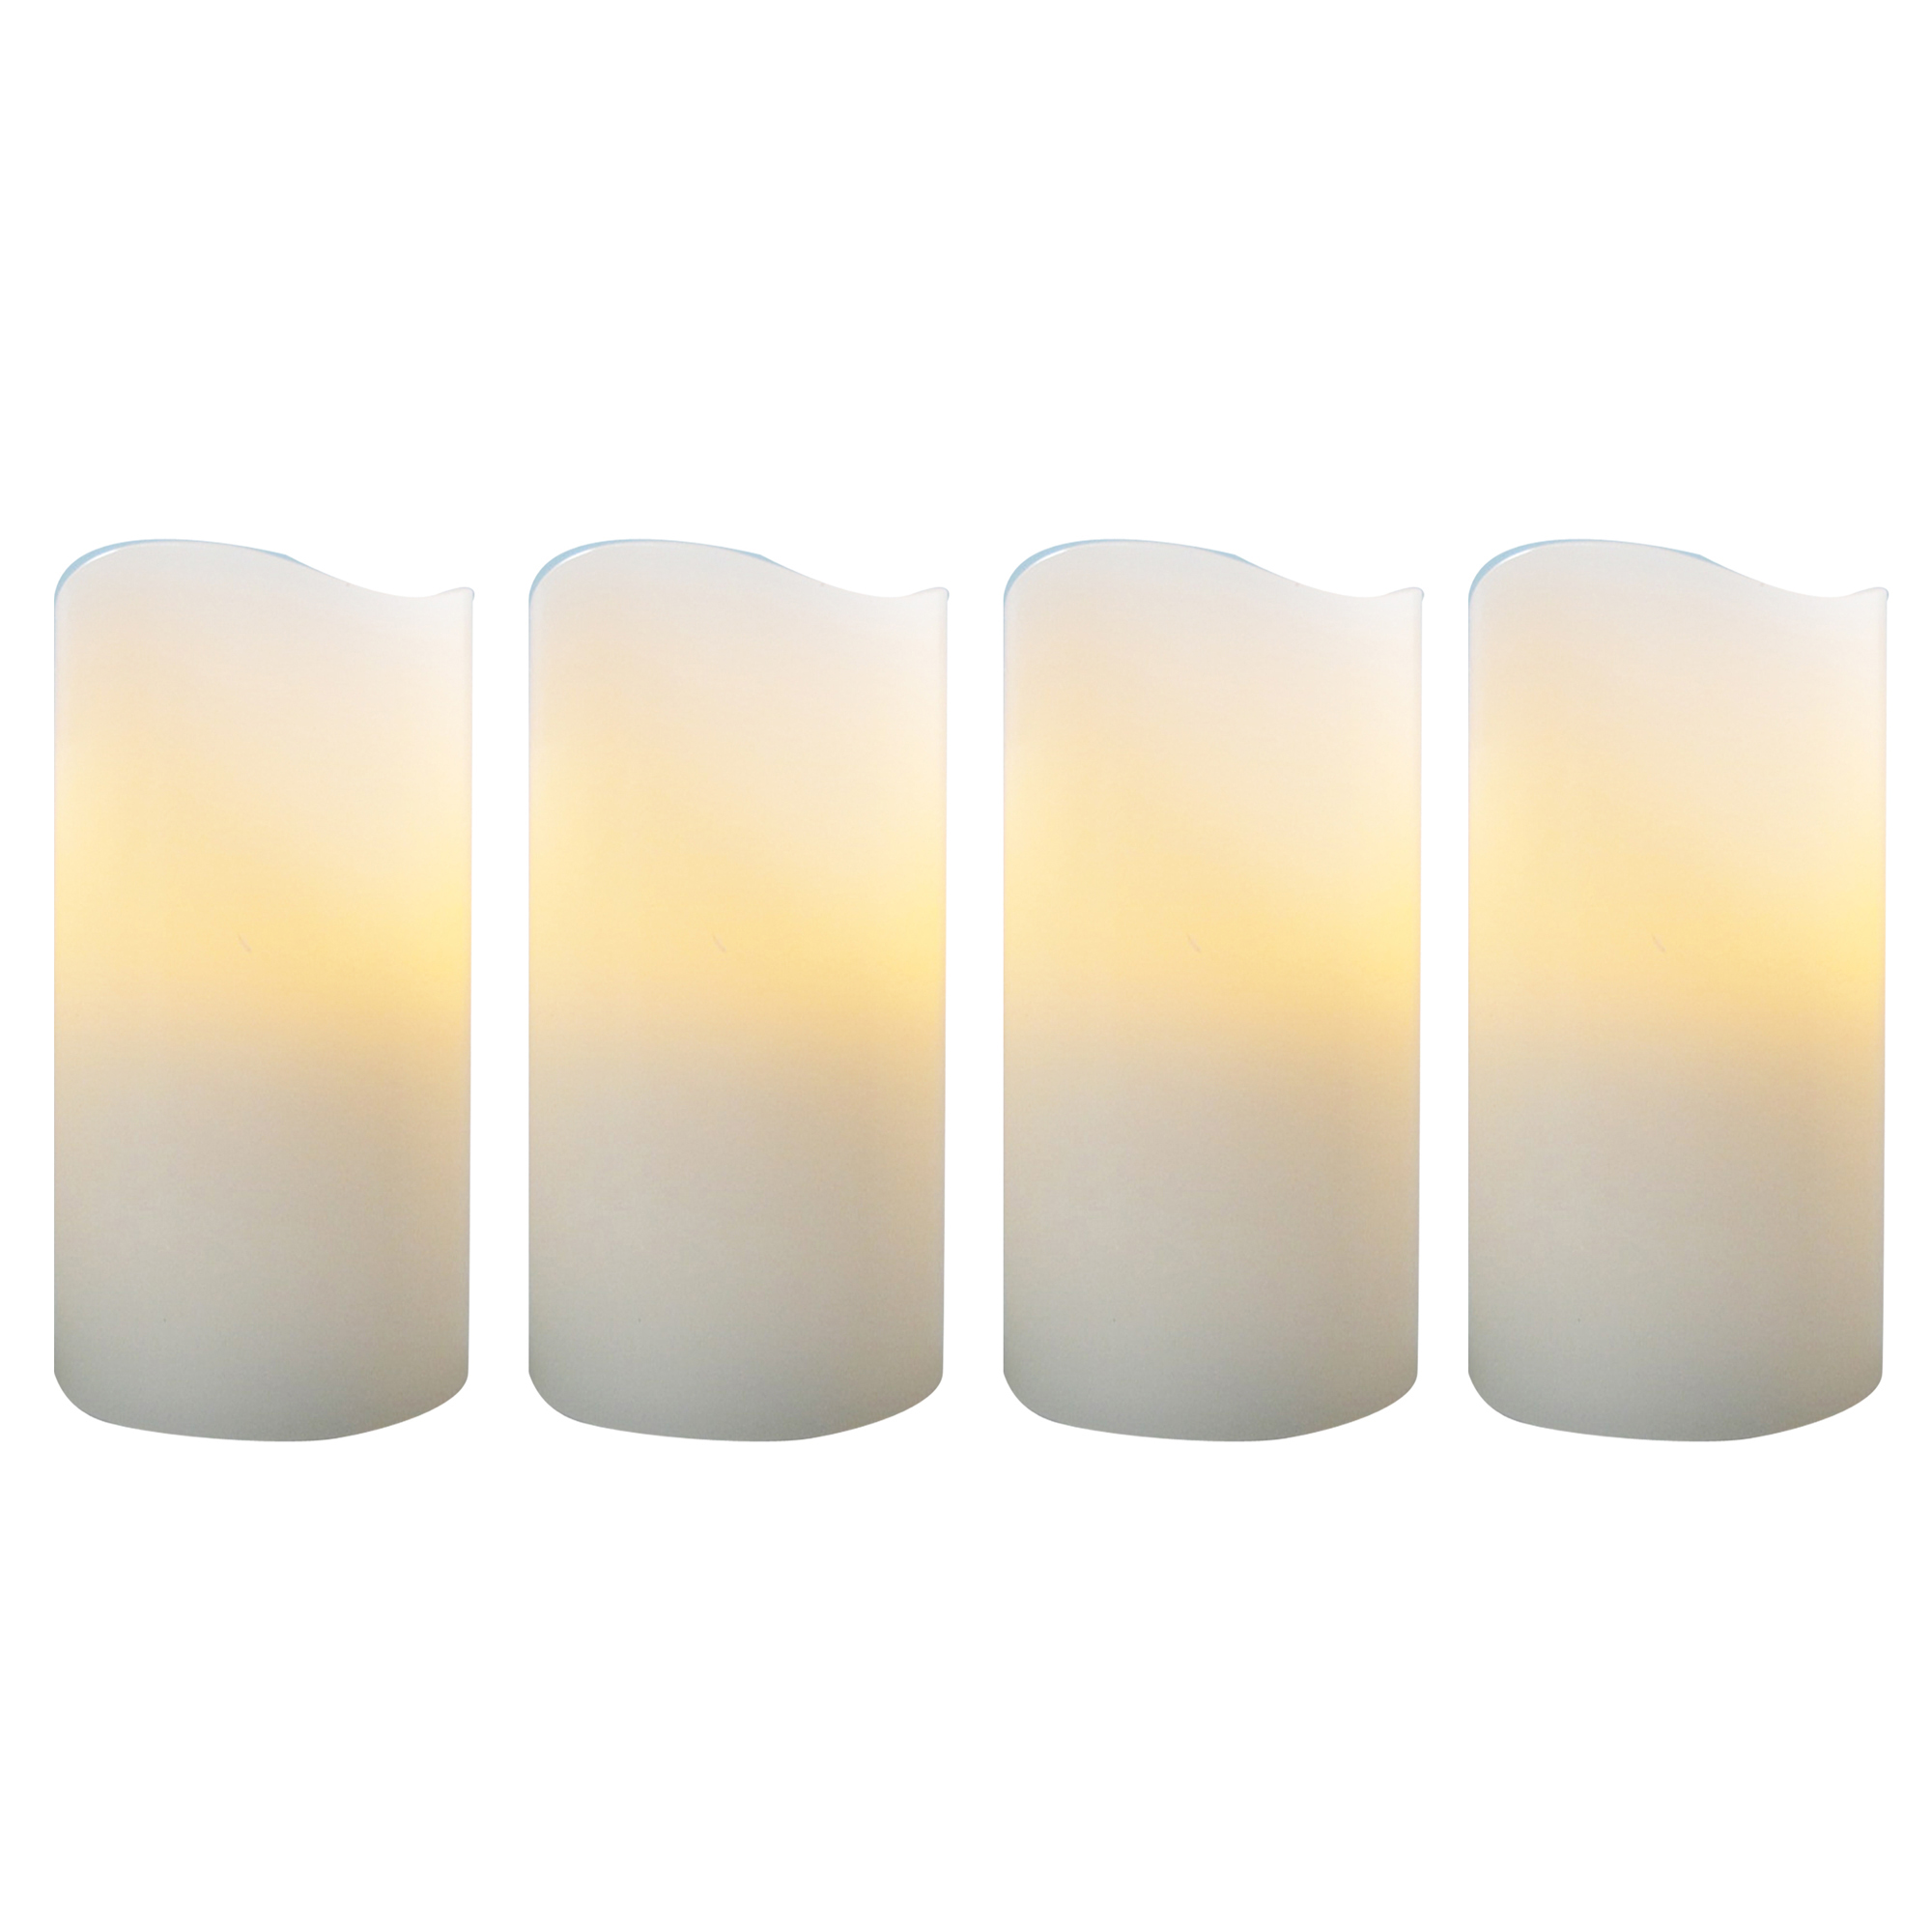 Better Homes and Gardens Flameless LED Pillar Candles 4-Pack, Vanilla Scented - image 1 of 4